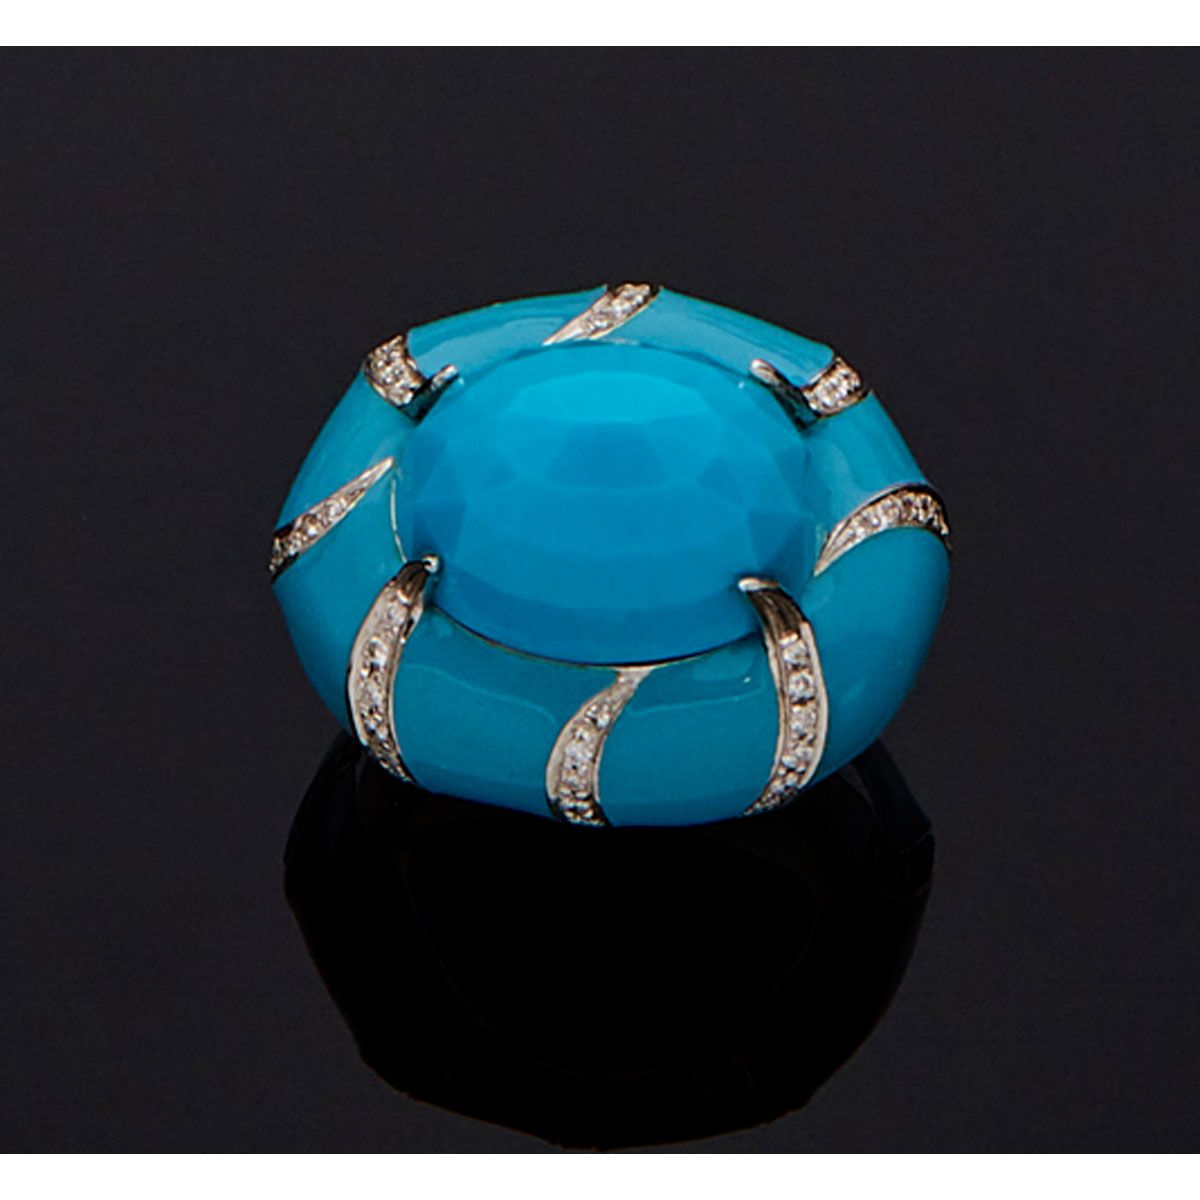 Null 18K white gold cocktail ring, set with turquoise enamel and topped with a b&hellip;